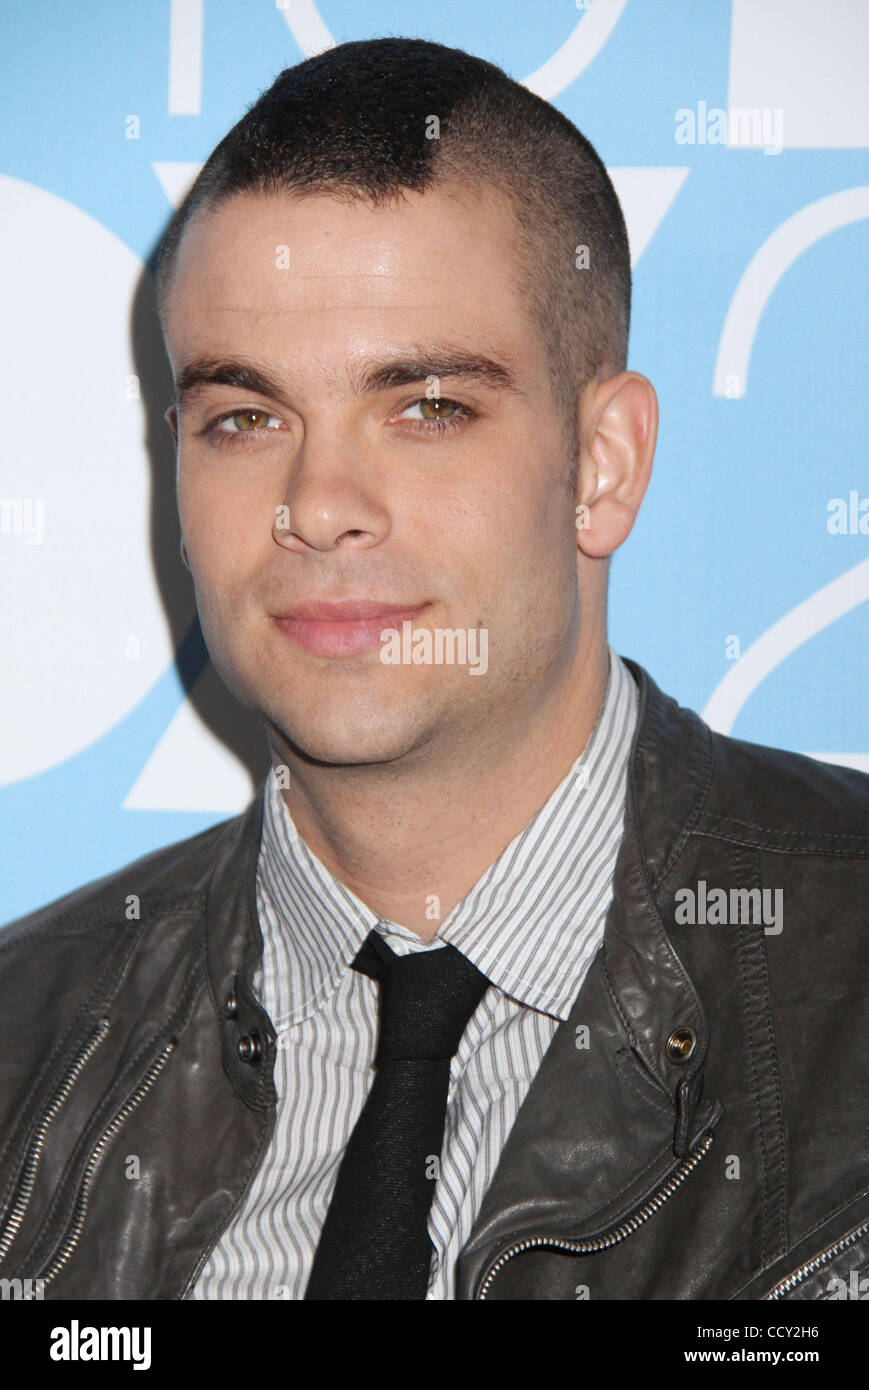 Actor MARK SALLING attends the FOX 2010 Upfront after-party held at Wollman Rink in Central Park. Stock Photo